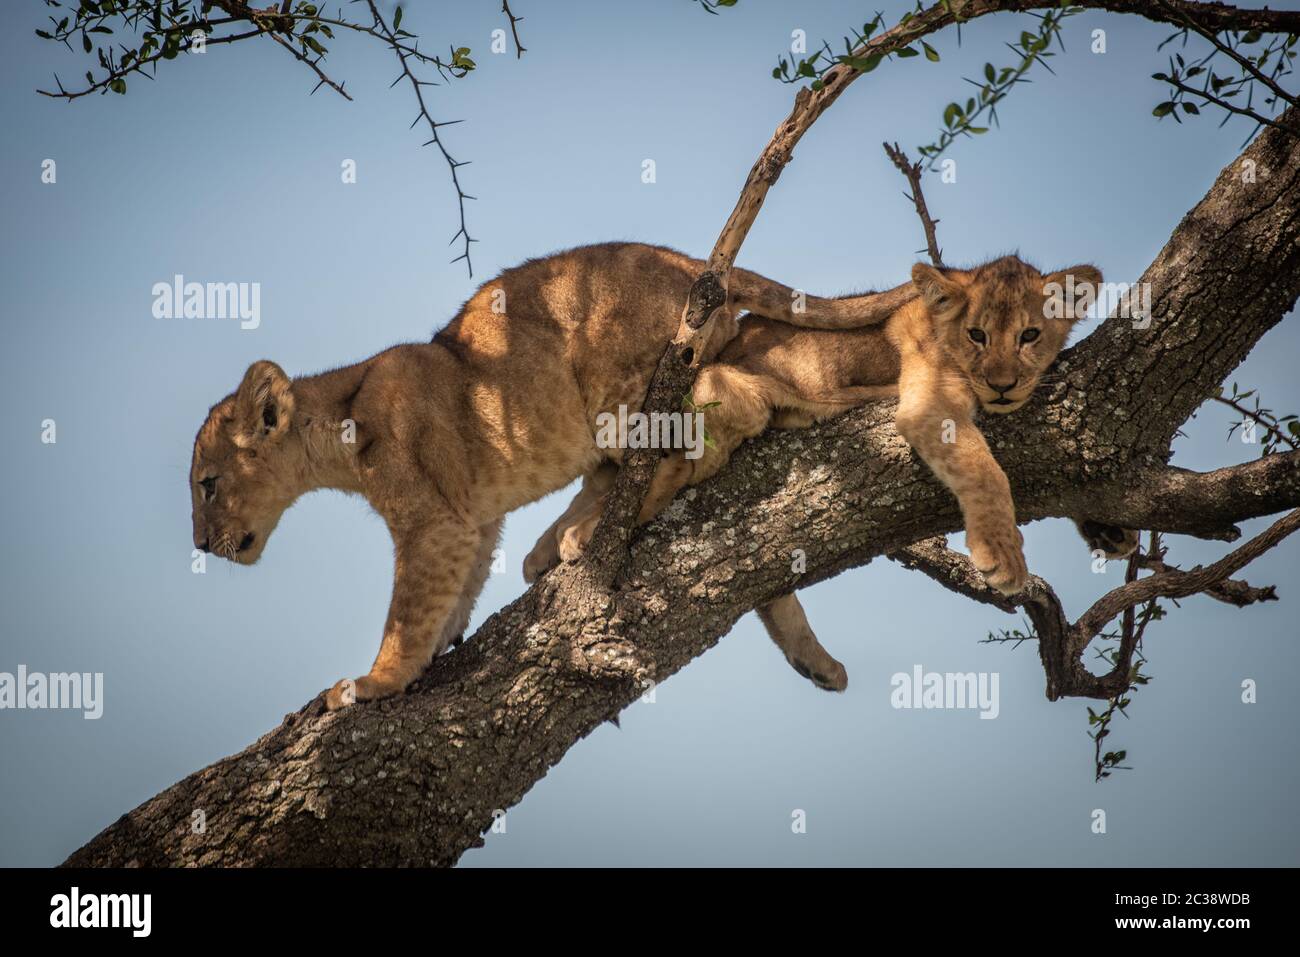 Lion cub climbing past another in tree Stock Photo